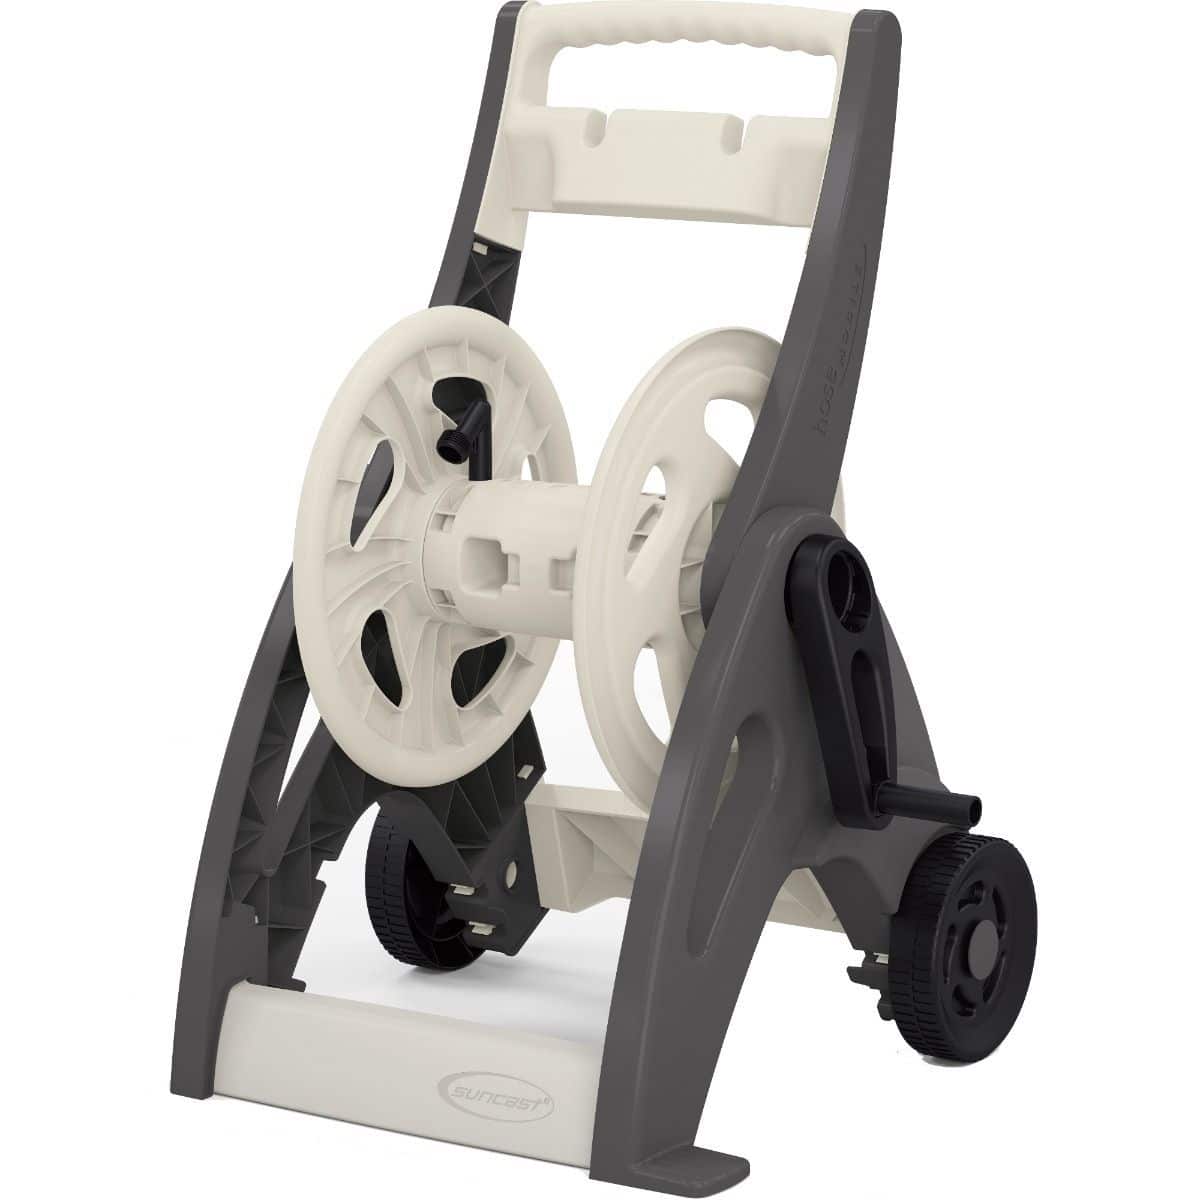  REROM Portable Hose Reel with Wheels,Water Hose Cart